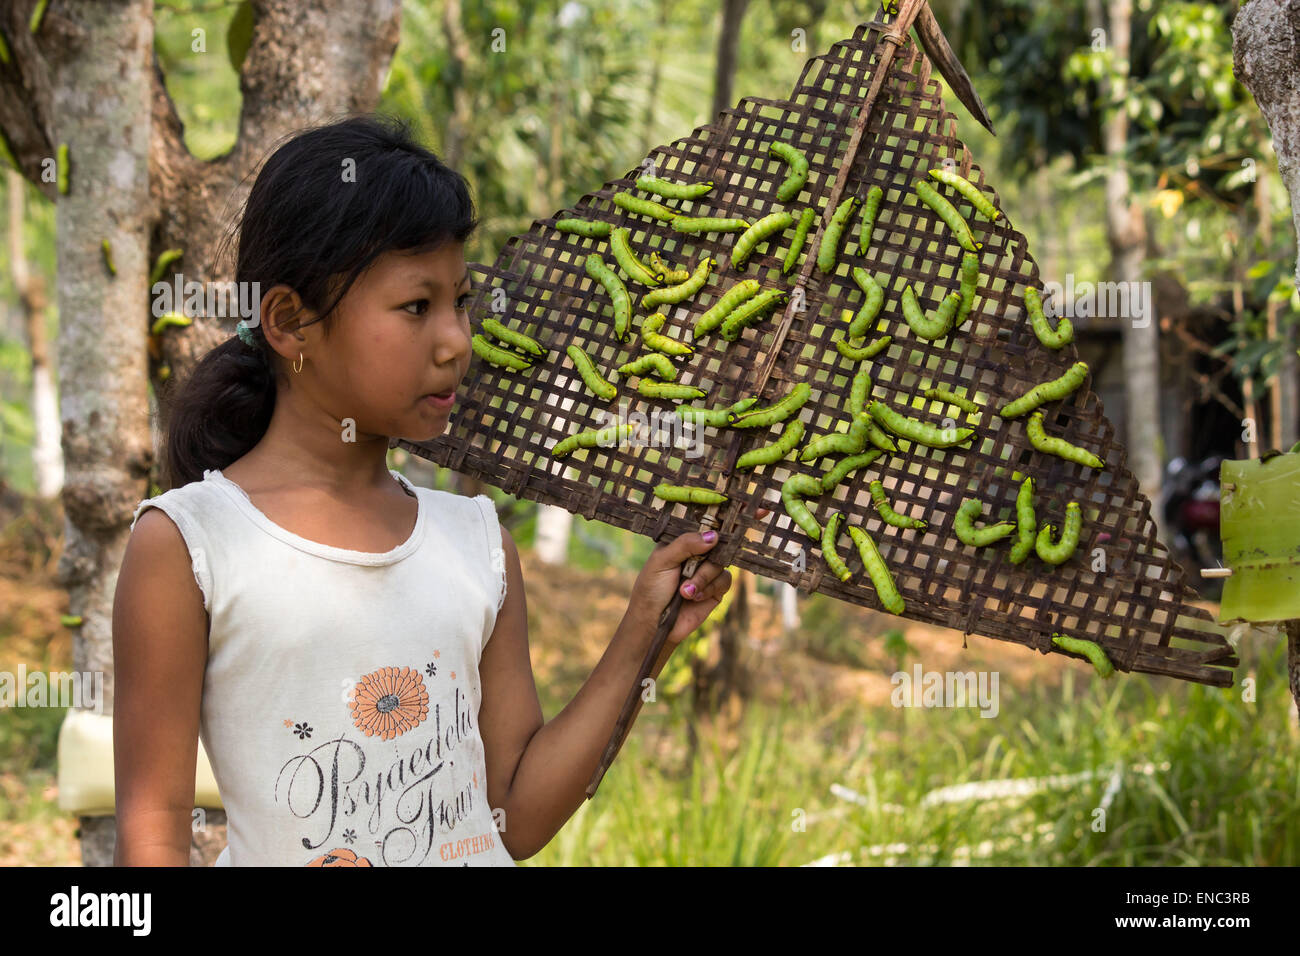 May 2, 2015 - Sivasagar, Assam, India - An Indian girl collects half grown Muga Silkworms to be released on another Som tree (Machilus Bombycina) for its further growth in the Bakata village in Sivasagar district of northeastern Assam state. Muga silk is the product of the silkworm Antheraea assamensis endemic to Assam. The larvae of these moths feed on som (Machilus bombycina) leaves. The silk produced is known for its glossy fine texture and durability. Muga Sulkworm farming is one of the most profitable businesses in the Indian Assam state as the product has a high market value. (Credit Ima Stock Photo